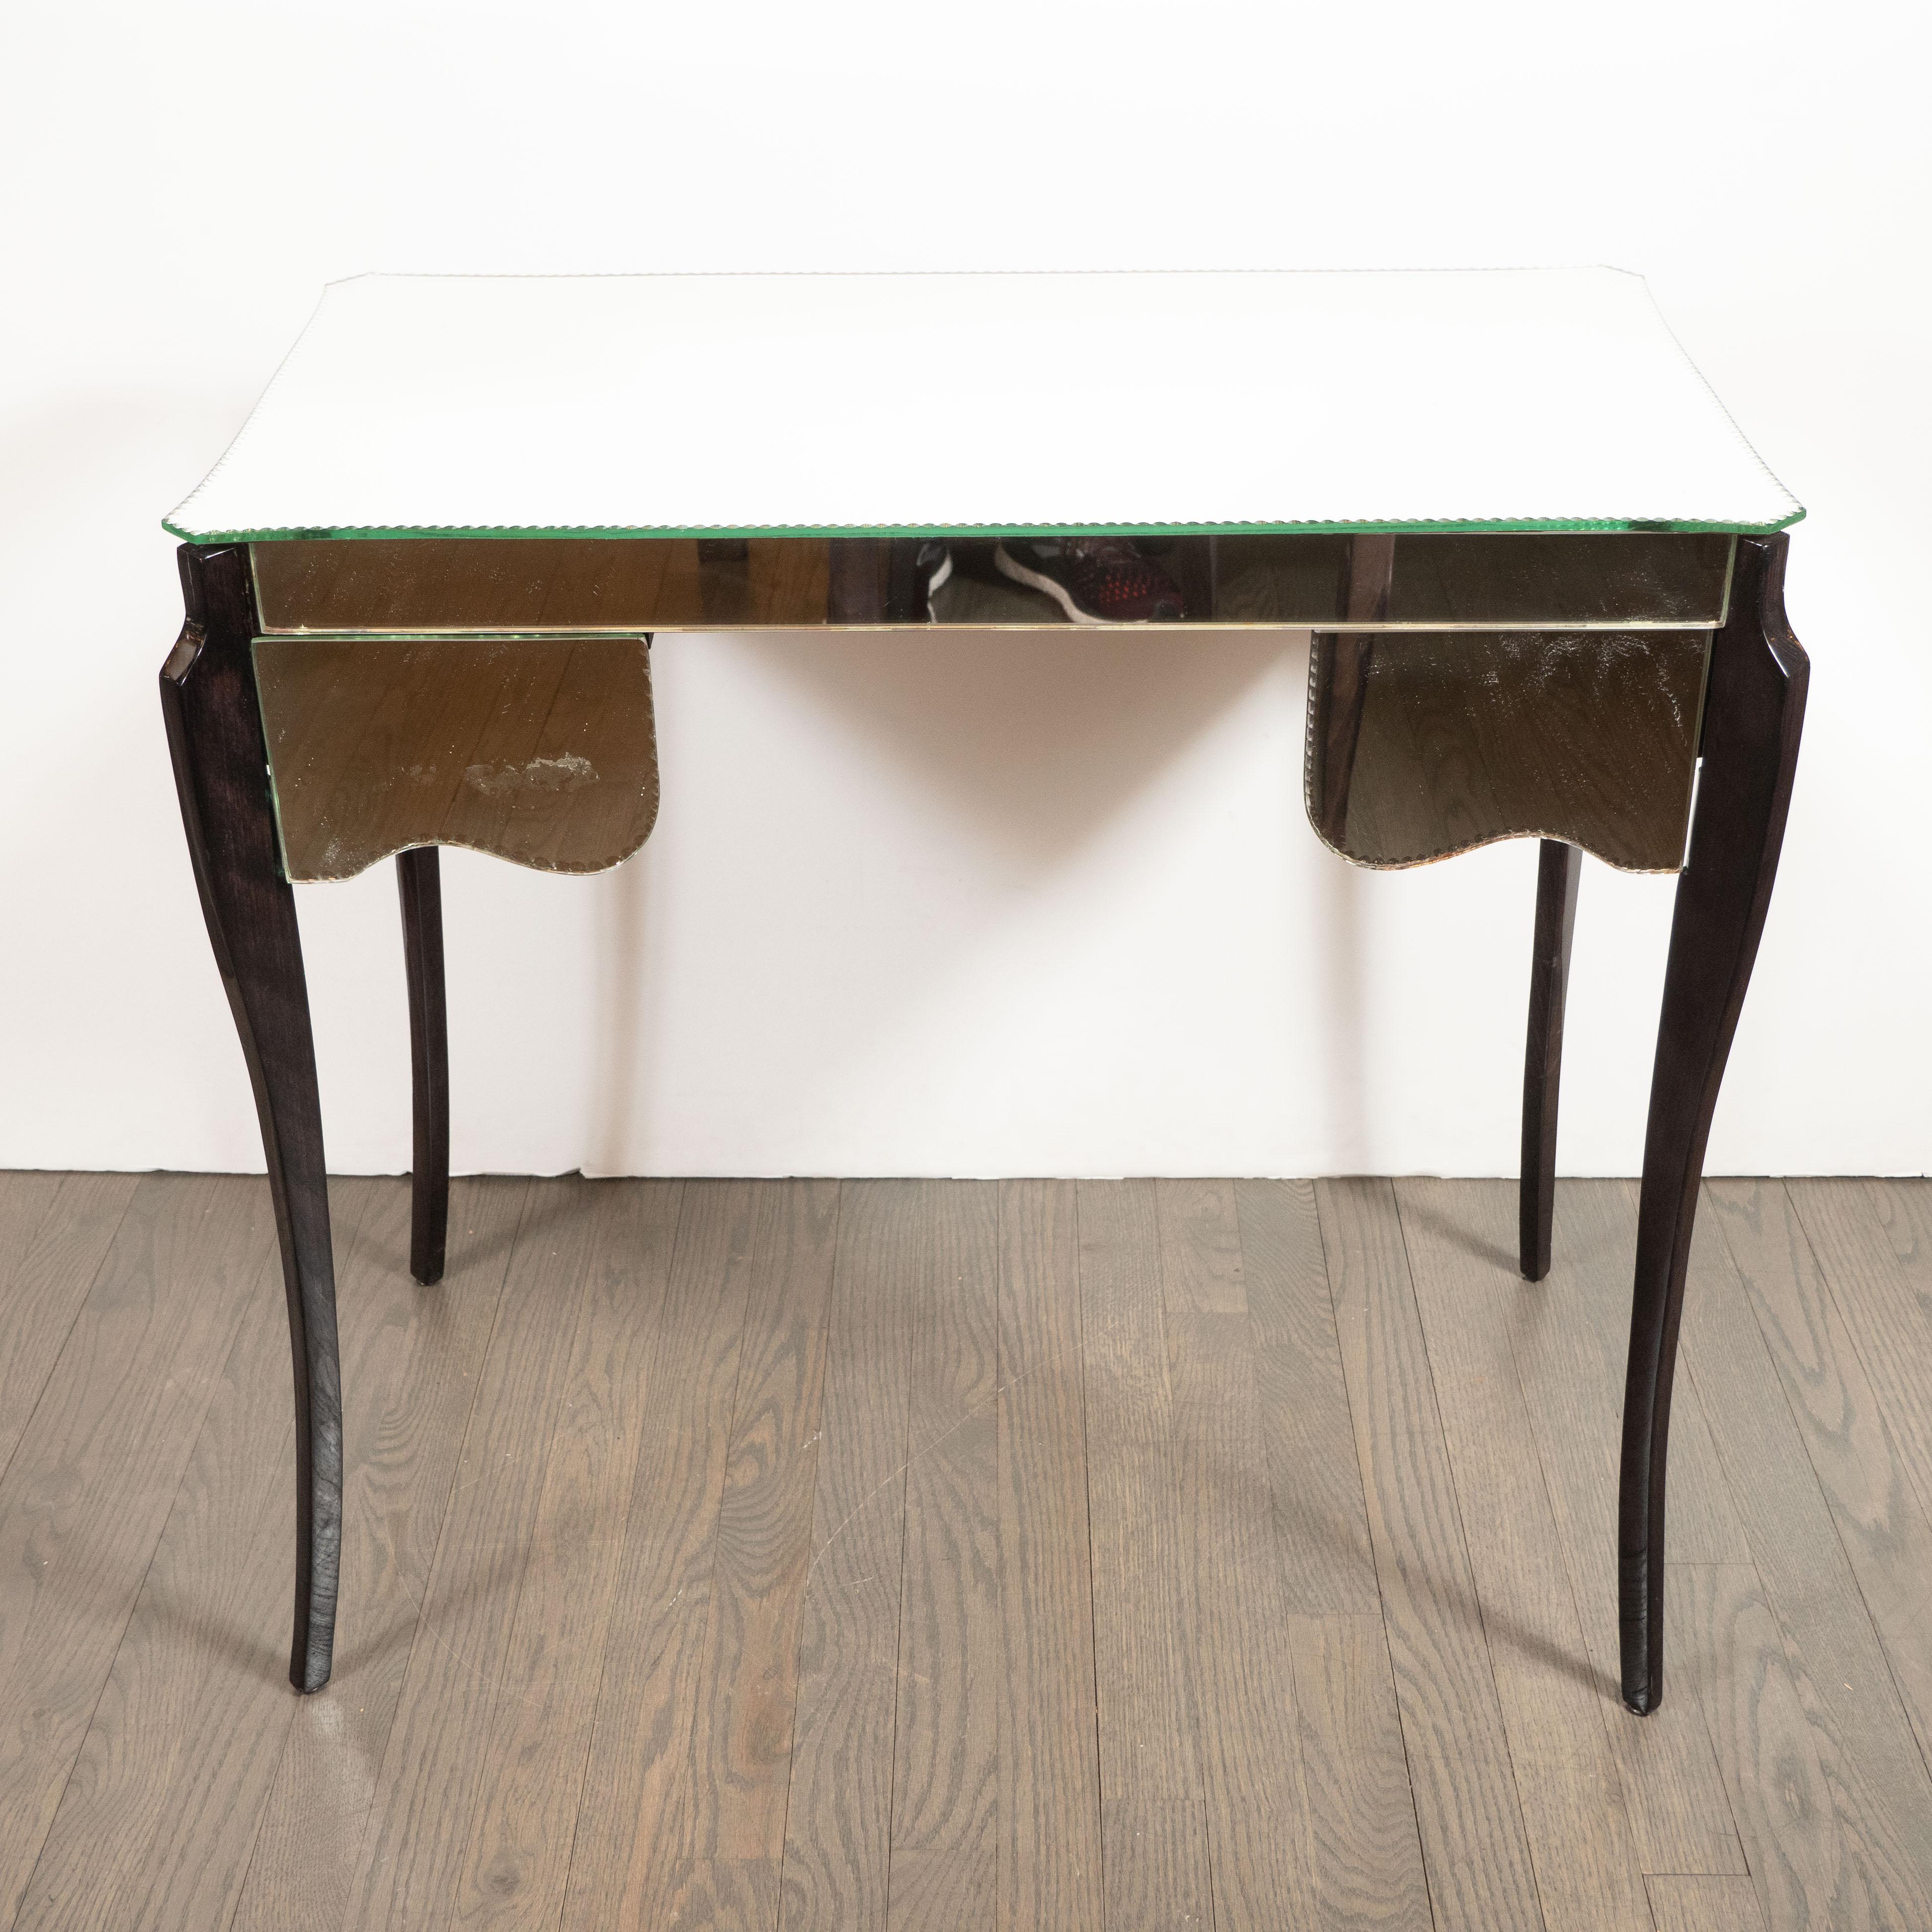 French Directoire Style Mirrored Vanity Table W/ Ebonized Walnut Cabriolet Legs 2